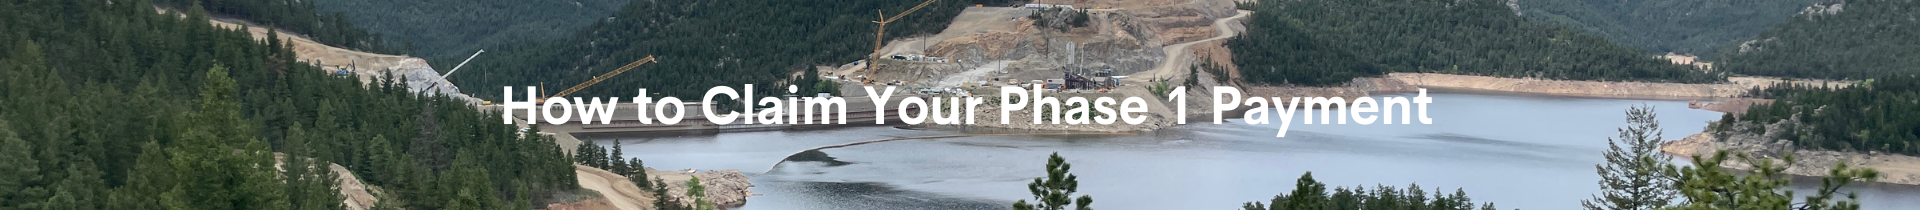 Denver Water Gross Dam construction project with words "How to claim your phase 1 payment" overlaying the image